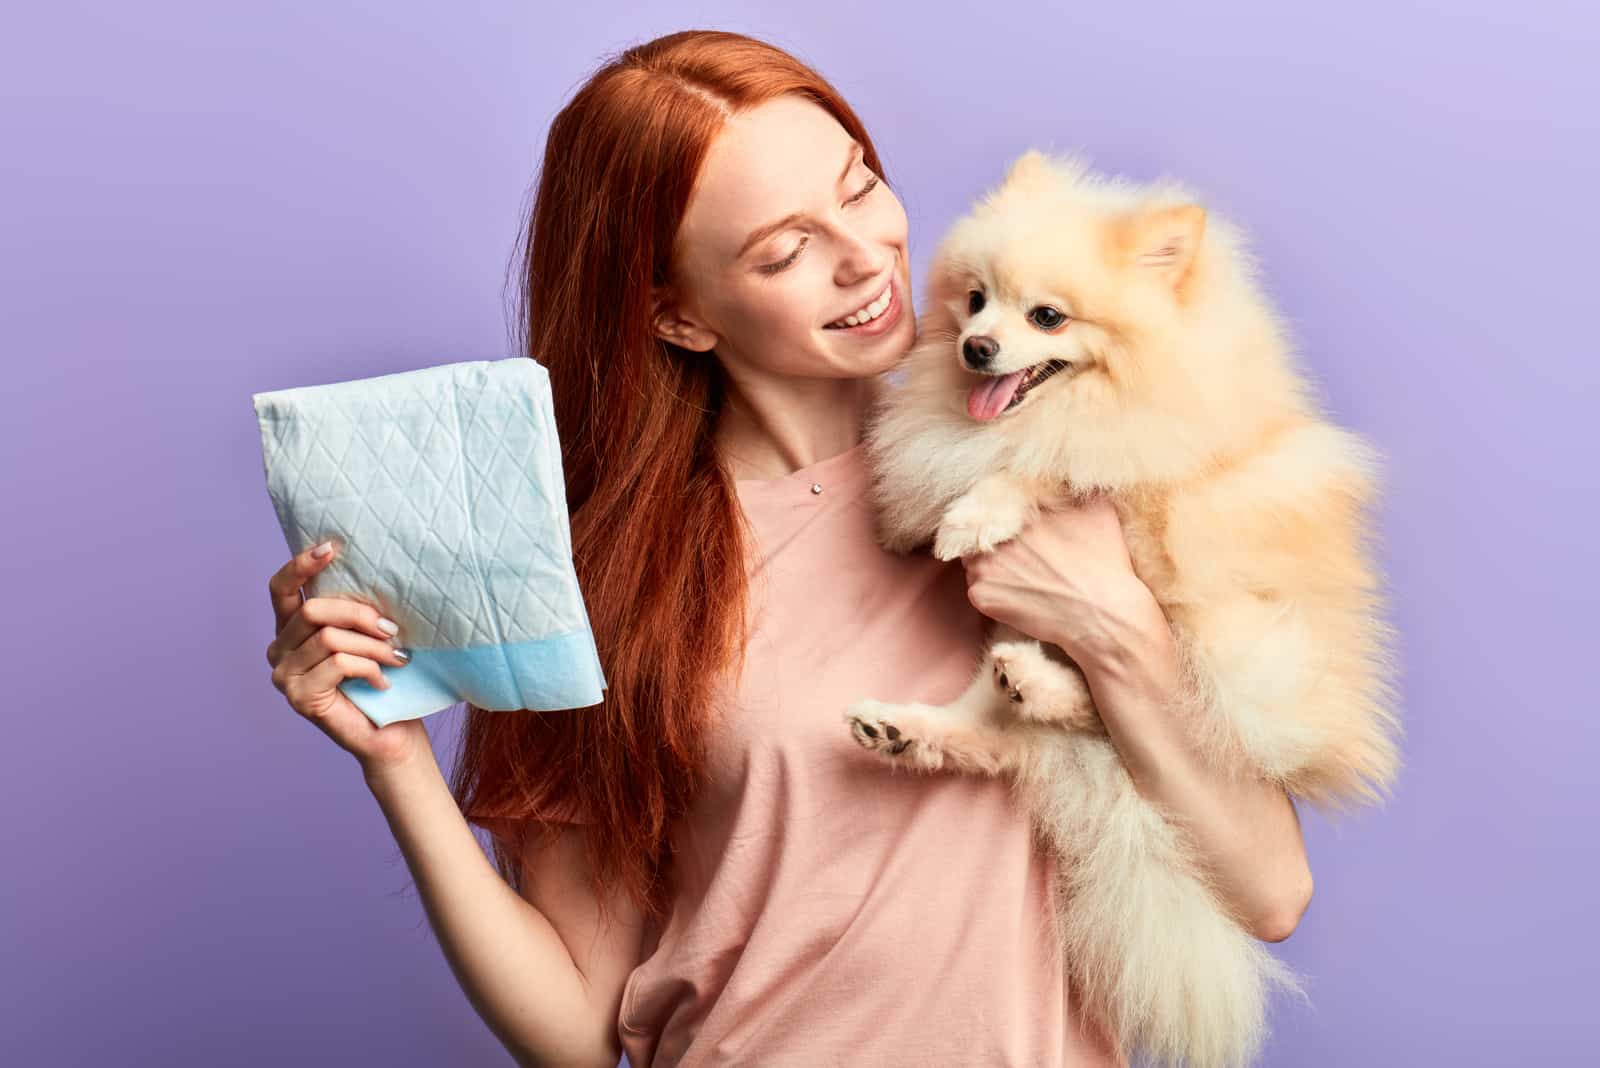 woman holding dog and diapers